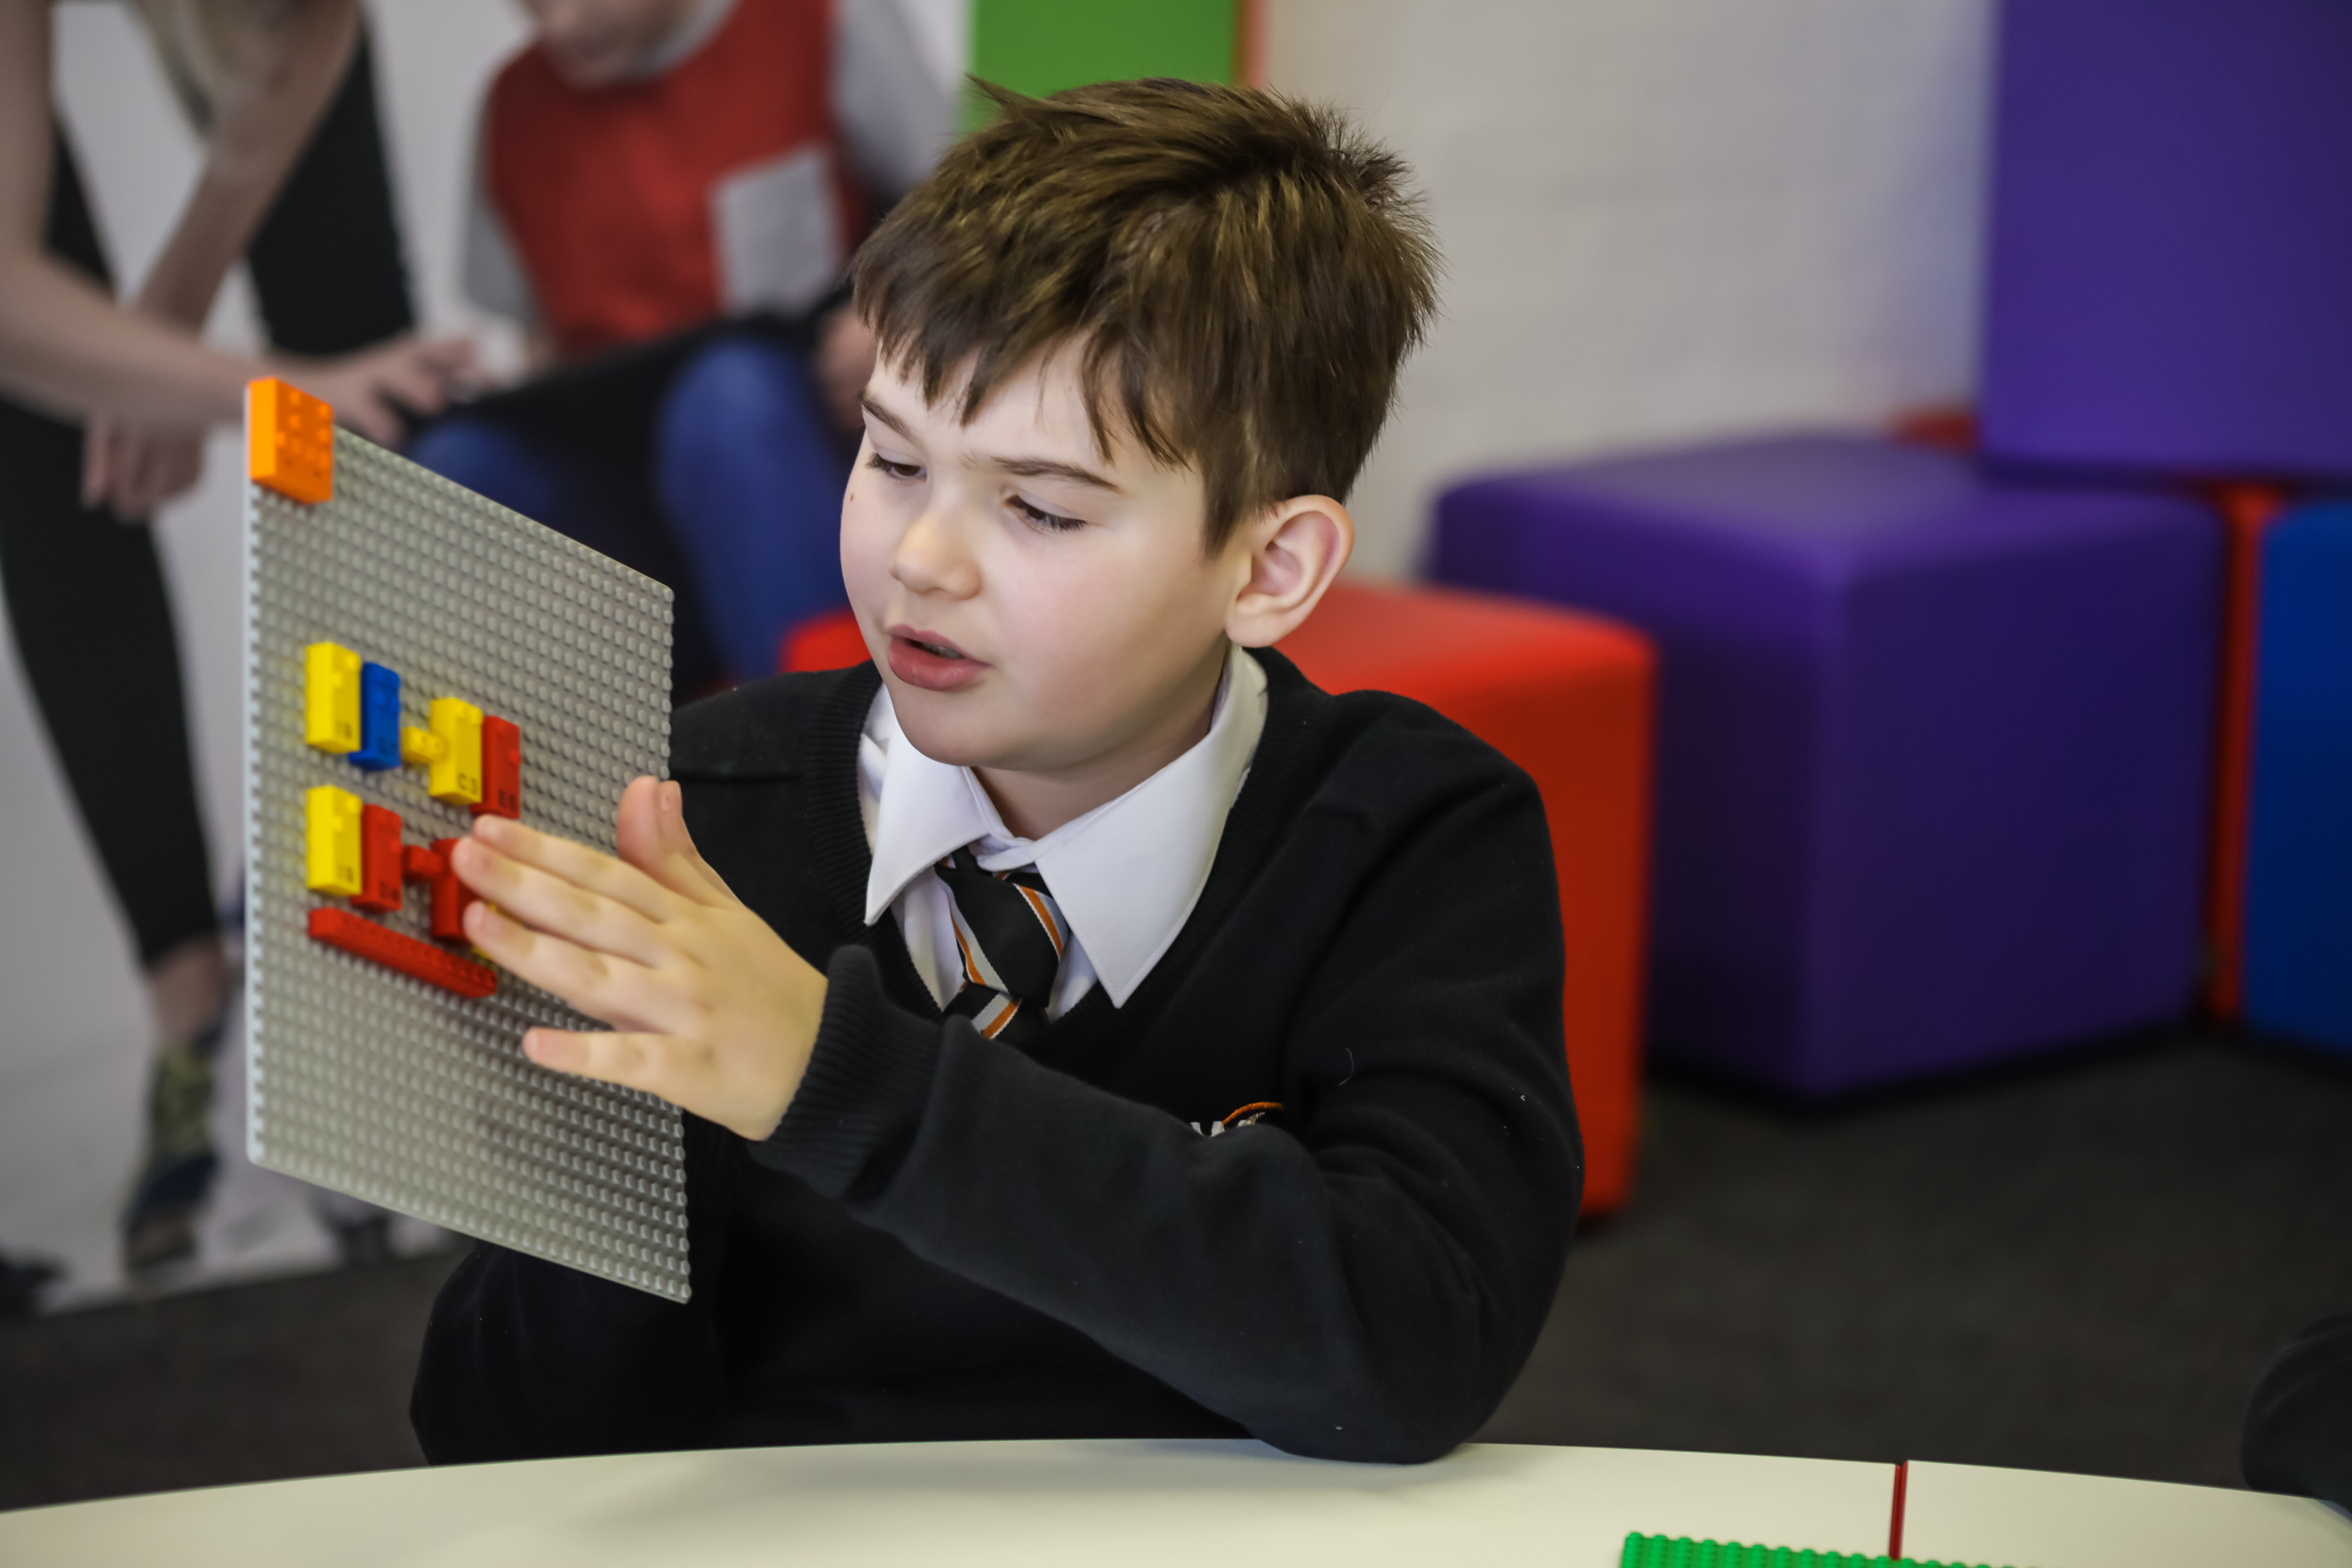 Image of child playing with LEGO toys